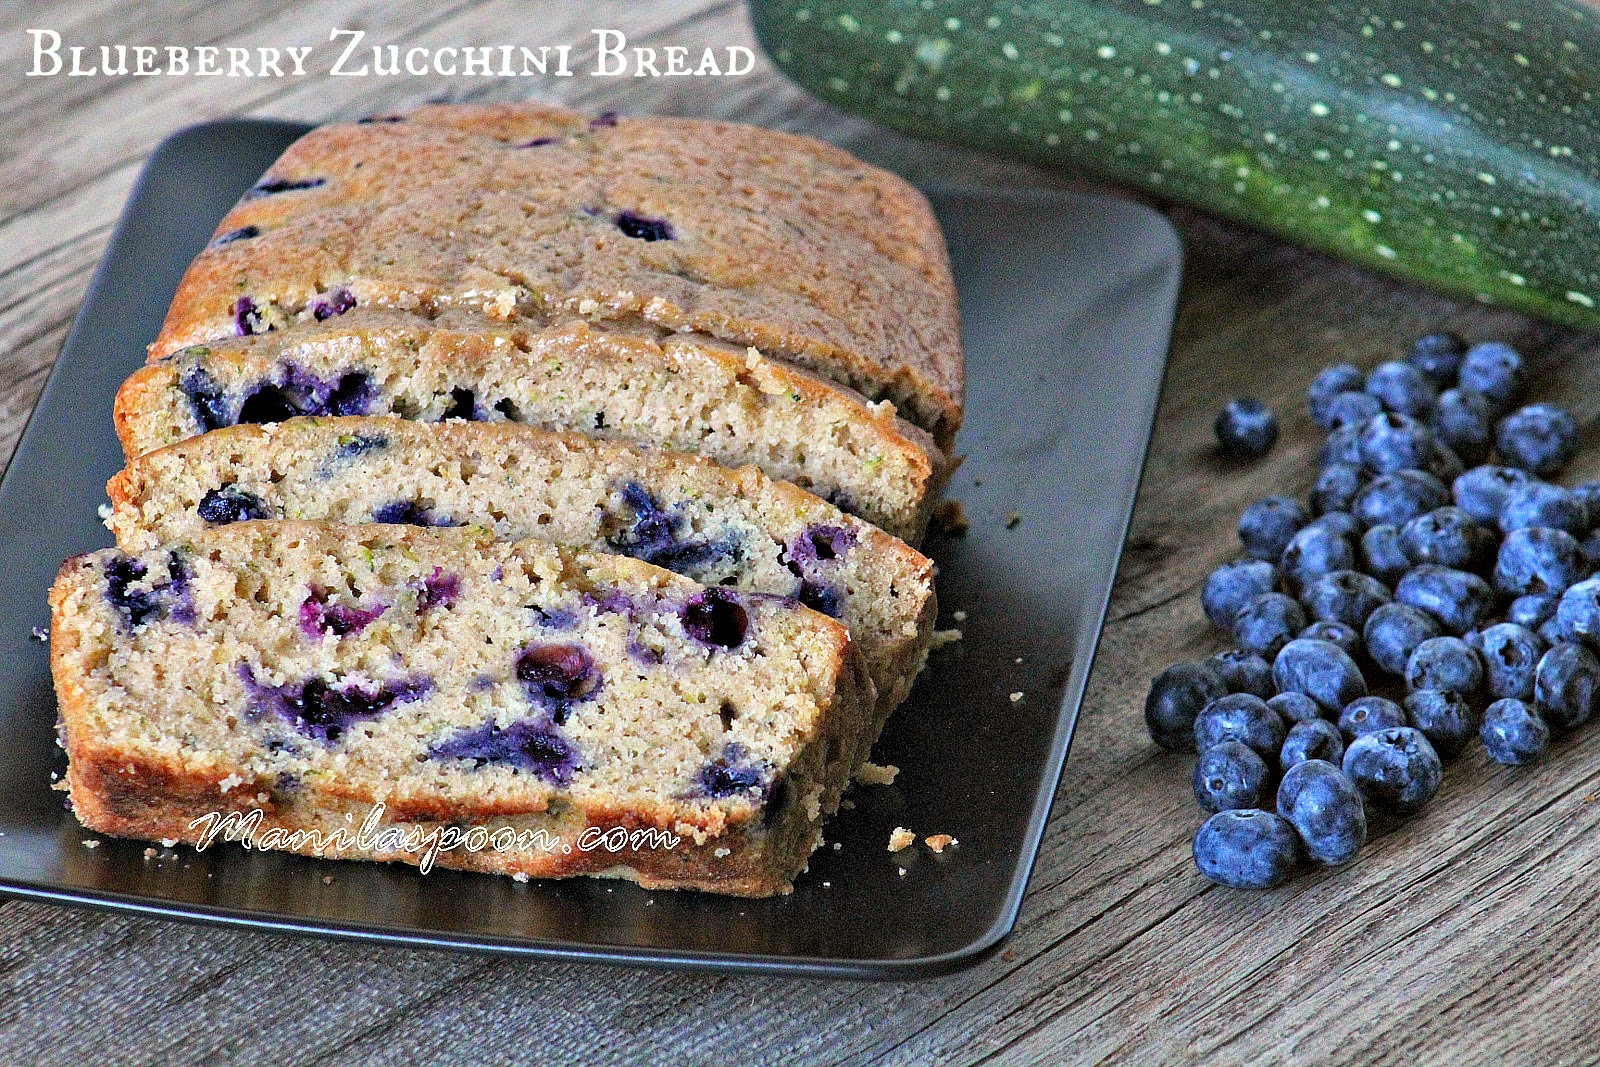 With both blueberries and zucchinis added, this summer bread comes out so moist and so deliciously good! Perfect treat for the whole family!